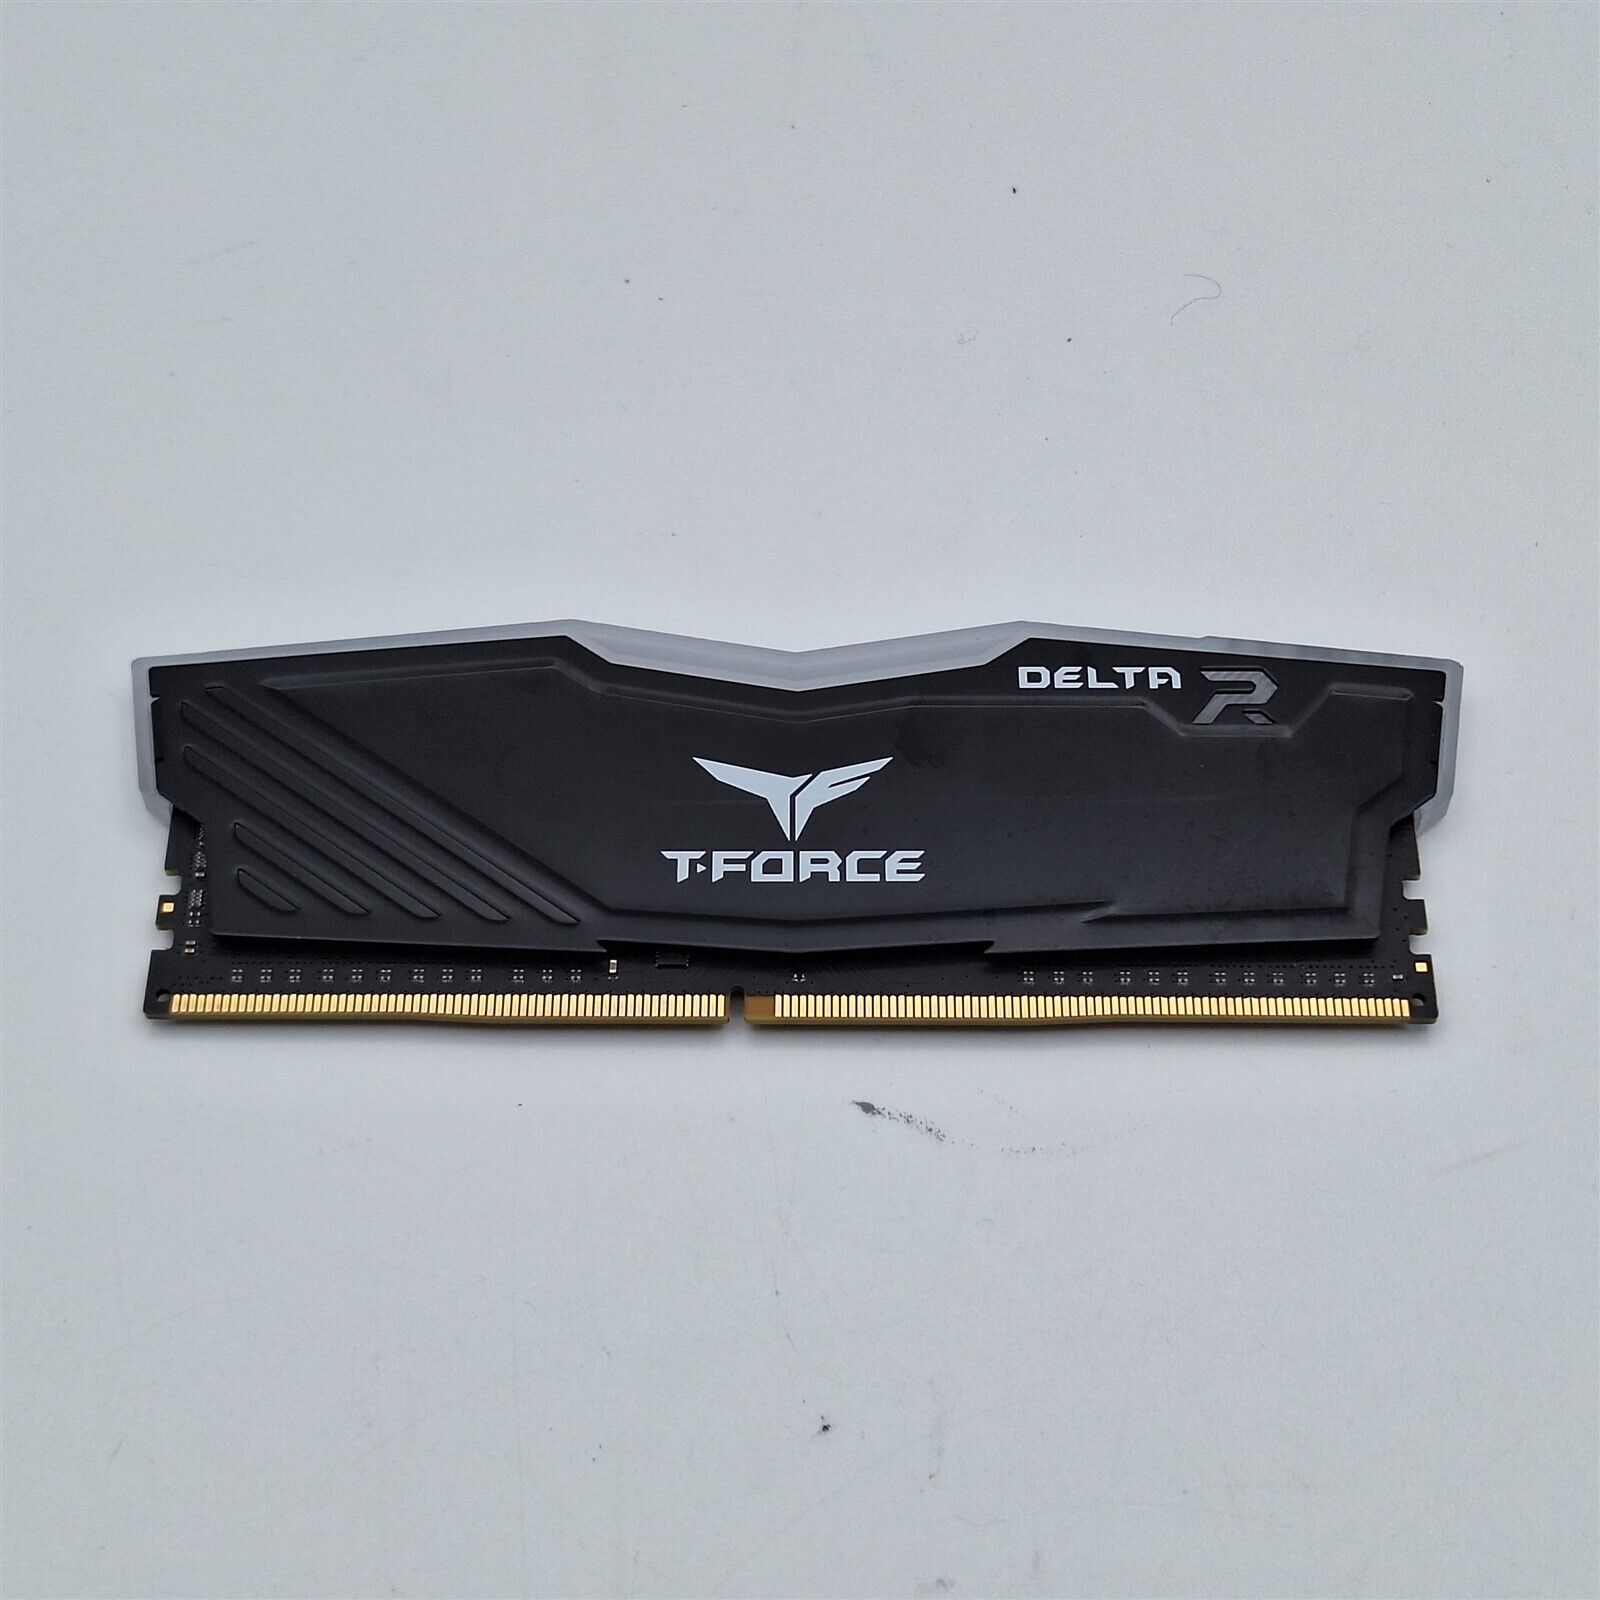 TeamGroup T-Force Delta R 8GB (1x8) DDR4 3200MHz RAM (TF3D48G3200HC16FBK)